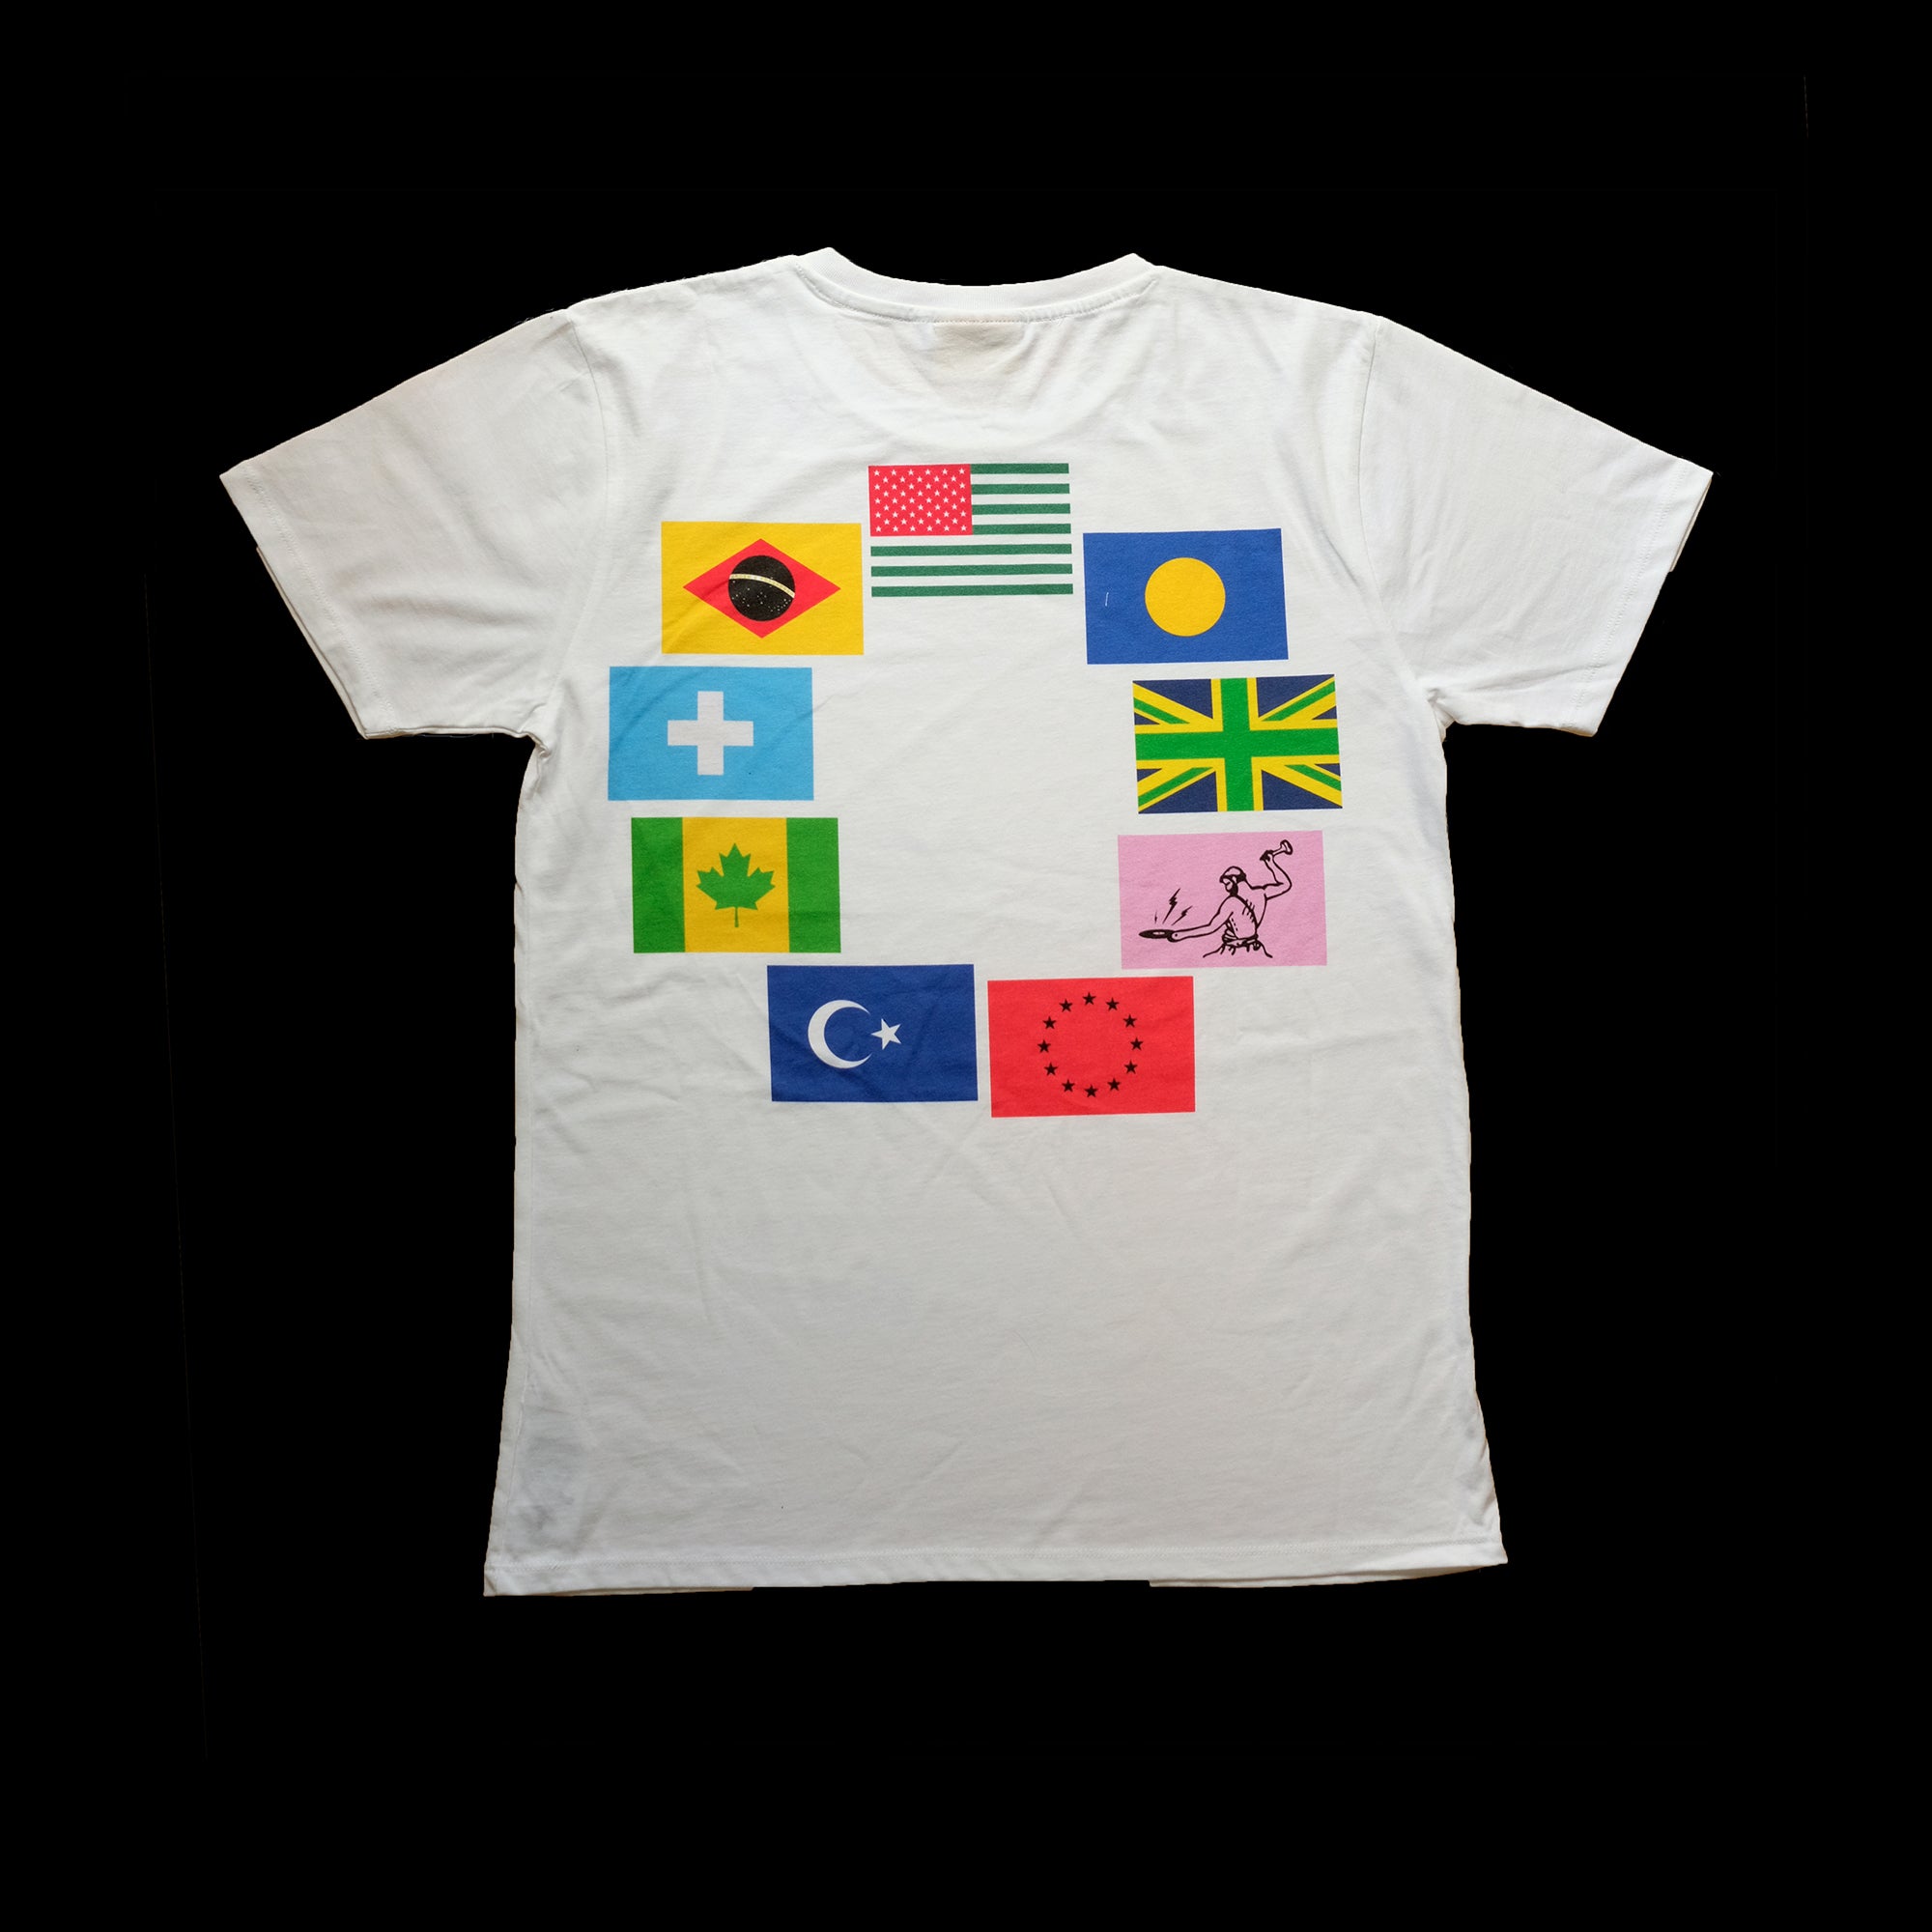 One World Tribe T-Shirt – Limited to 150